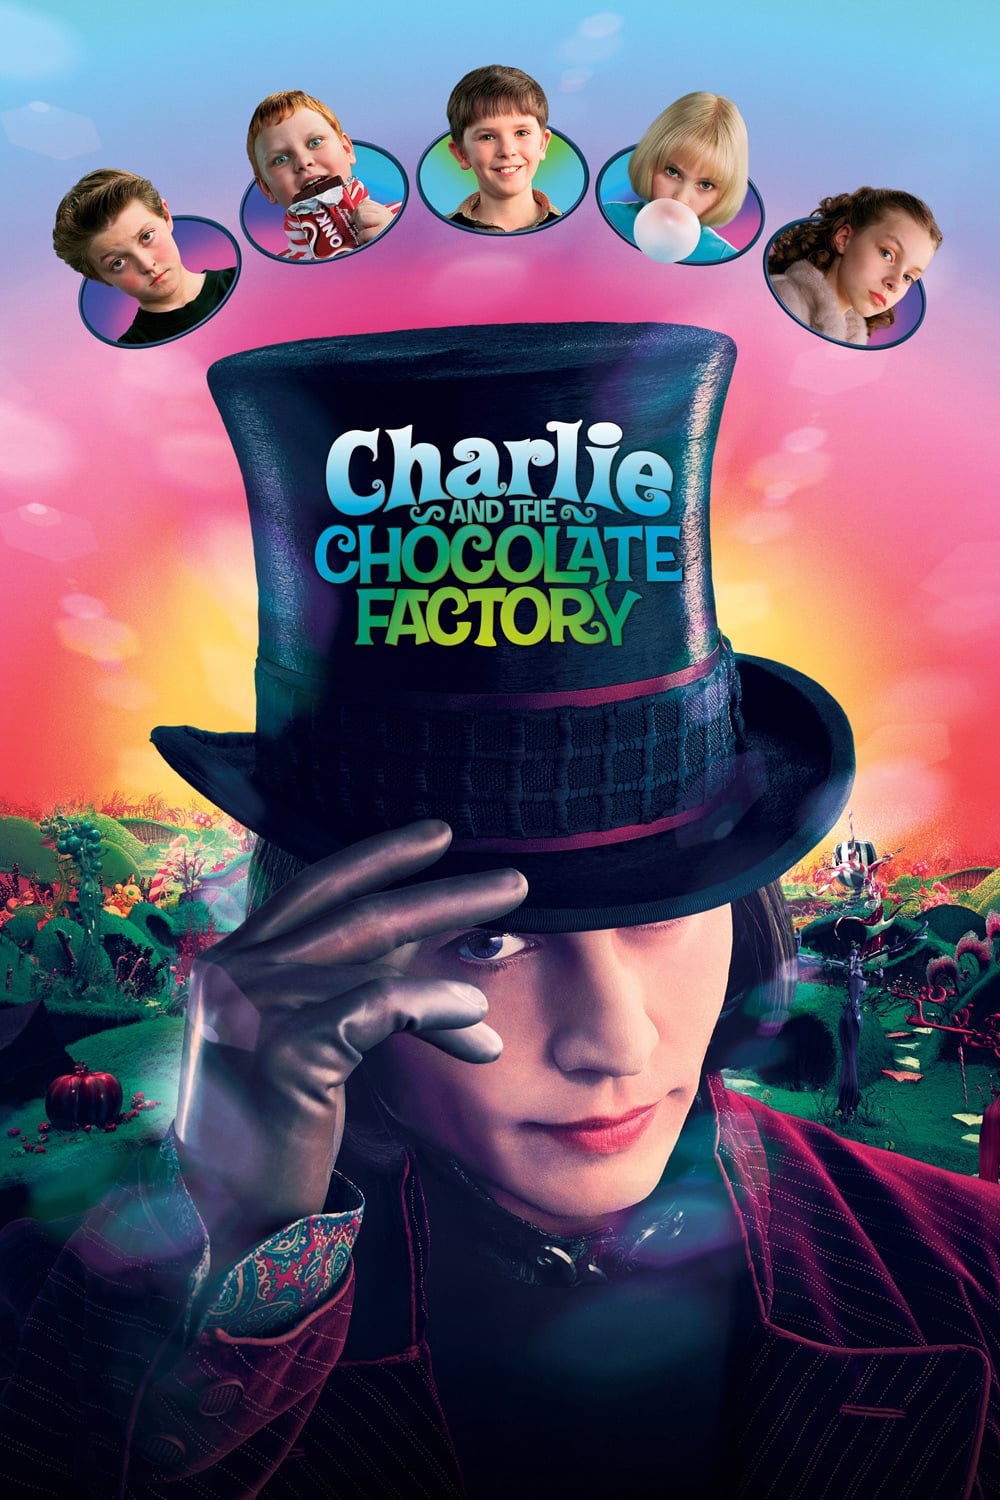 Poster for the movie "Charlie and the Chocolate Factory"